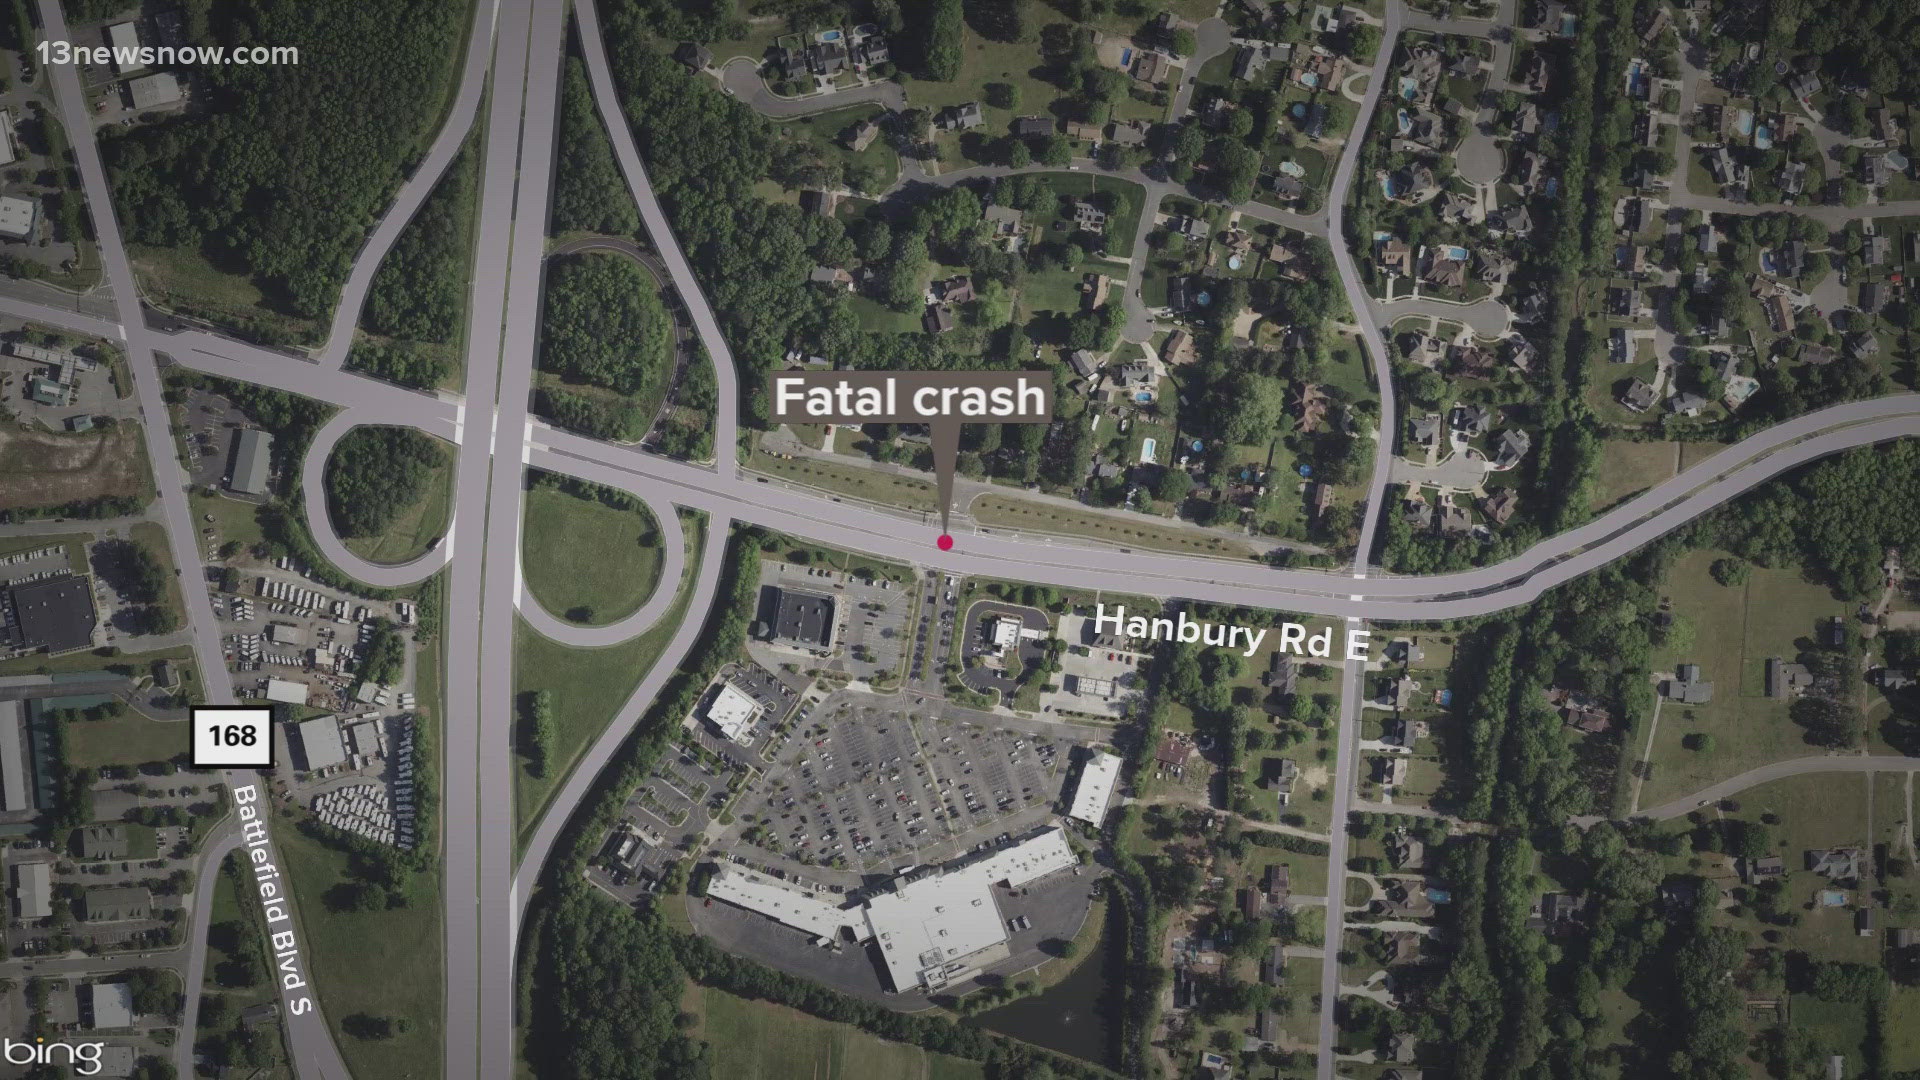 The crash happened around 5:17 p.m. at the intersection of Hanbury Road and Benson Lane, near the Route 168 Expressway ramps.